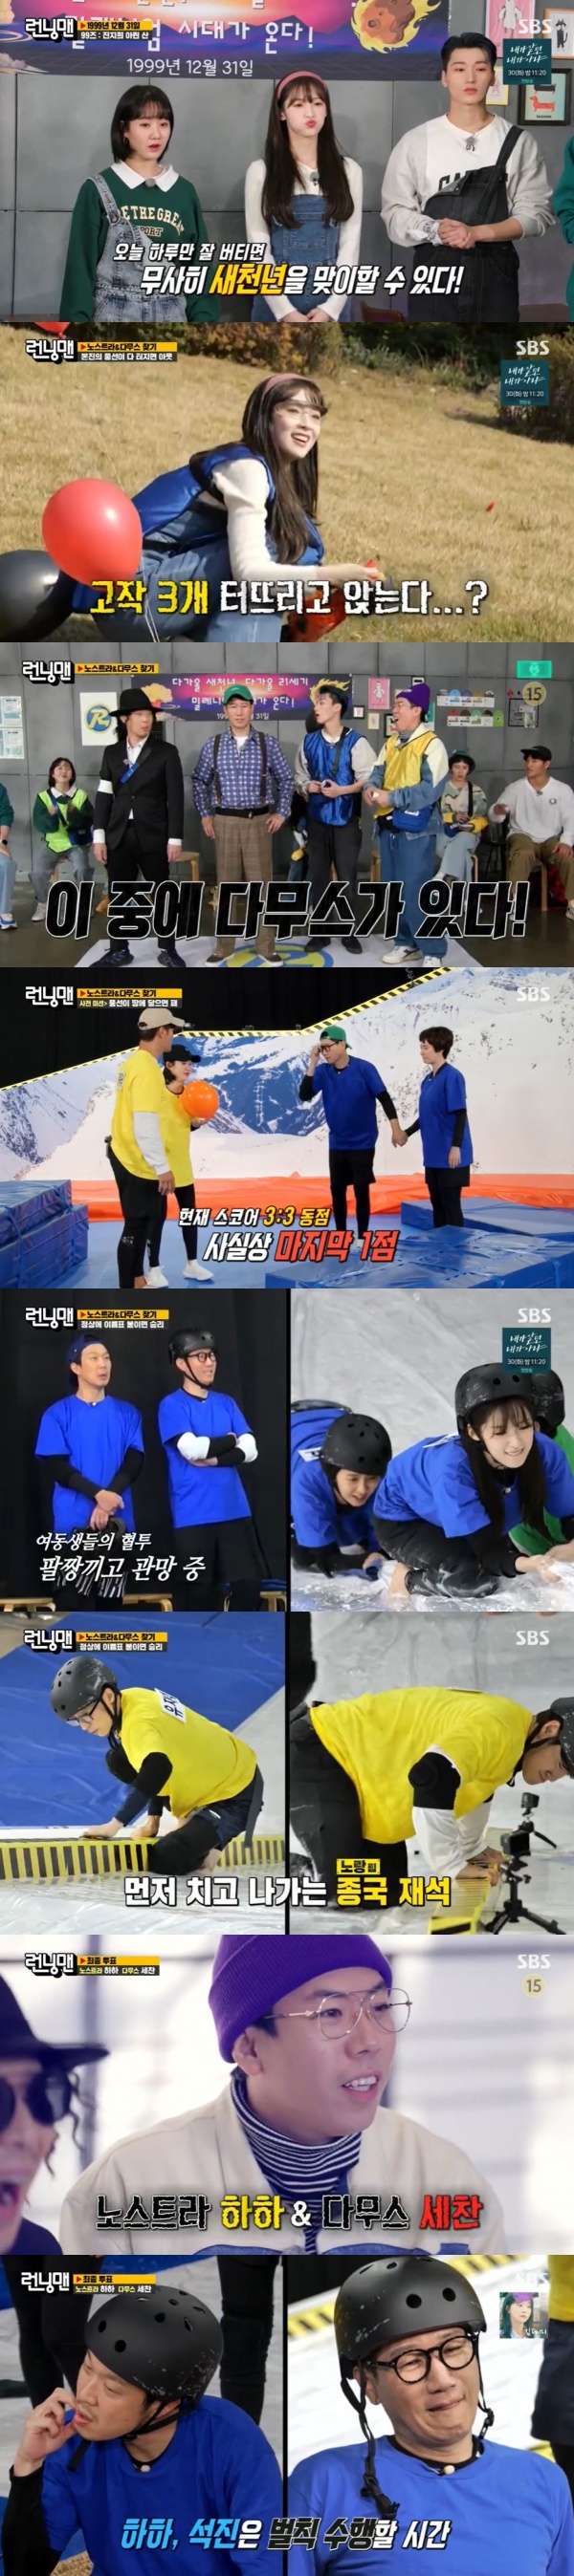 On the 28th SBS entertainment program Running Man, Nostra and Damus Prophet Find Race were held.On this day, Nostra and Damus search race were held along with Jin Ji-hee, Omai Girl Arine and Mount Eighties.On the first mission, Black Team Arryn suddenly escaped from a great chance and became suspicious. Arryn said, I was resting for a while.The Red Team (Yoo Jae-Suk and Haha and Jin Ji-hee) were out for the first time; Yoo Jae-Suk suspected that the Haha that does not keep the original is strange as a prophet.Black team Kim Jong-kook also continued to suspect that Haha played outside common sense.Nostra has been ranked in the team, the production team said, adding that Damus prophecy is wrong.Kim Jong-kook said, Haha and Sechan are prophets, he said. I can think of it as the correct answer.As a result of the decision, the members narrowed down Yang Se-chan to Damus as a nostra candidate.The Konyaspor team (Yang Se-chan and Jeon So-min and the mountain), the blue team (Ji Suk-jin and Song Ji-hyo and Haha and Arryn), and the yellow team (Yoo Jae-Suk and Kim Jong-kook and Jin Ji-hee) were decided.The Konyaspor team won the final victory in the pre-mission and won additional voting rights.Each team went on to face the final mission Put a Name tag on top: Kim Jong-kook first arrived at the top, making the yellow team the No.The Blues then took second place; Ji Suk-jin doubted Yang Se-chan.Yellow teams Yoo Jae-Suk and Kim Jong-kook also won first place in the second round match; Konyaspors team came in second and the blue team came in third.Ji Suk-jin did not suspect that Haha pointed to the blue team last.The production team announced that Nostra and Damus failed to predict the rankings; Nostra was Haha and Damus was Yang Se-chan.Members found Haha but failed to find Yang Se-chan.Haha, who was caught in the congestion, and Ji Suk-jin, who had the most votes, carried out penalties.Meanwhile, Running Man is an entertainment program that Korean stars play games and missions together and give laughter. It broadcasts every Sunday at 5 p.m.Photo SBS broadcast screen capture